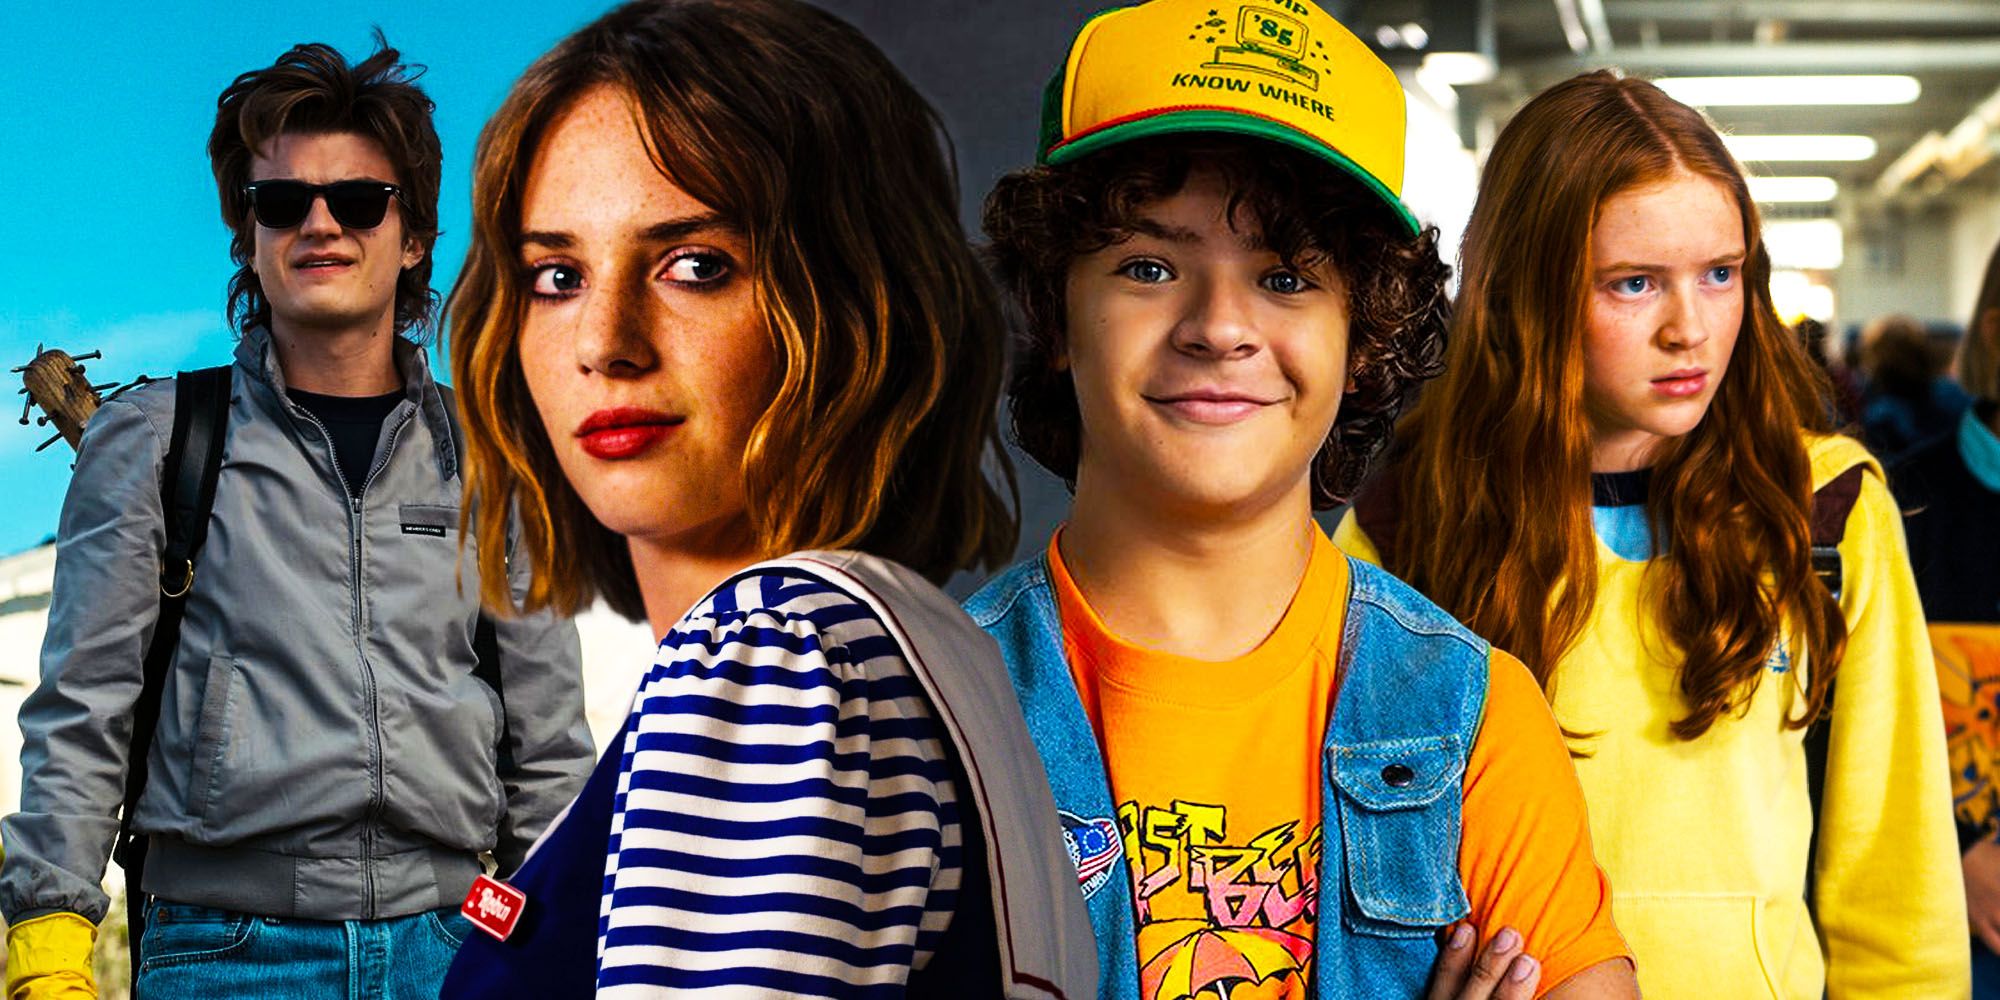 Stranger Things Season 4 Set Photos Tease Its Best Character TeamUp Yet